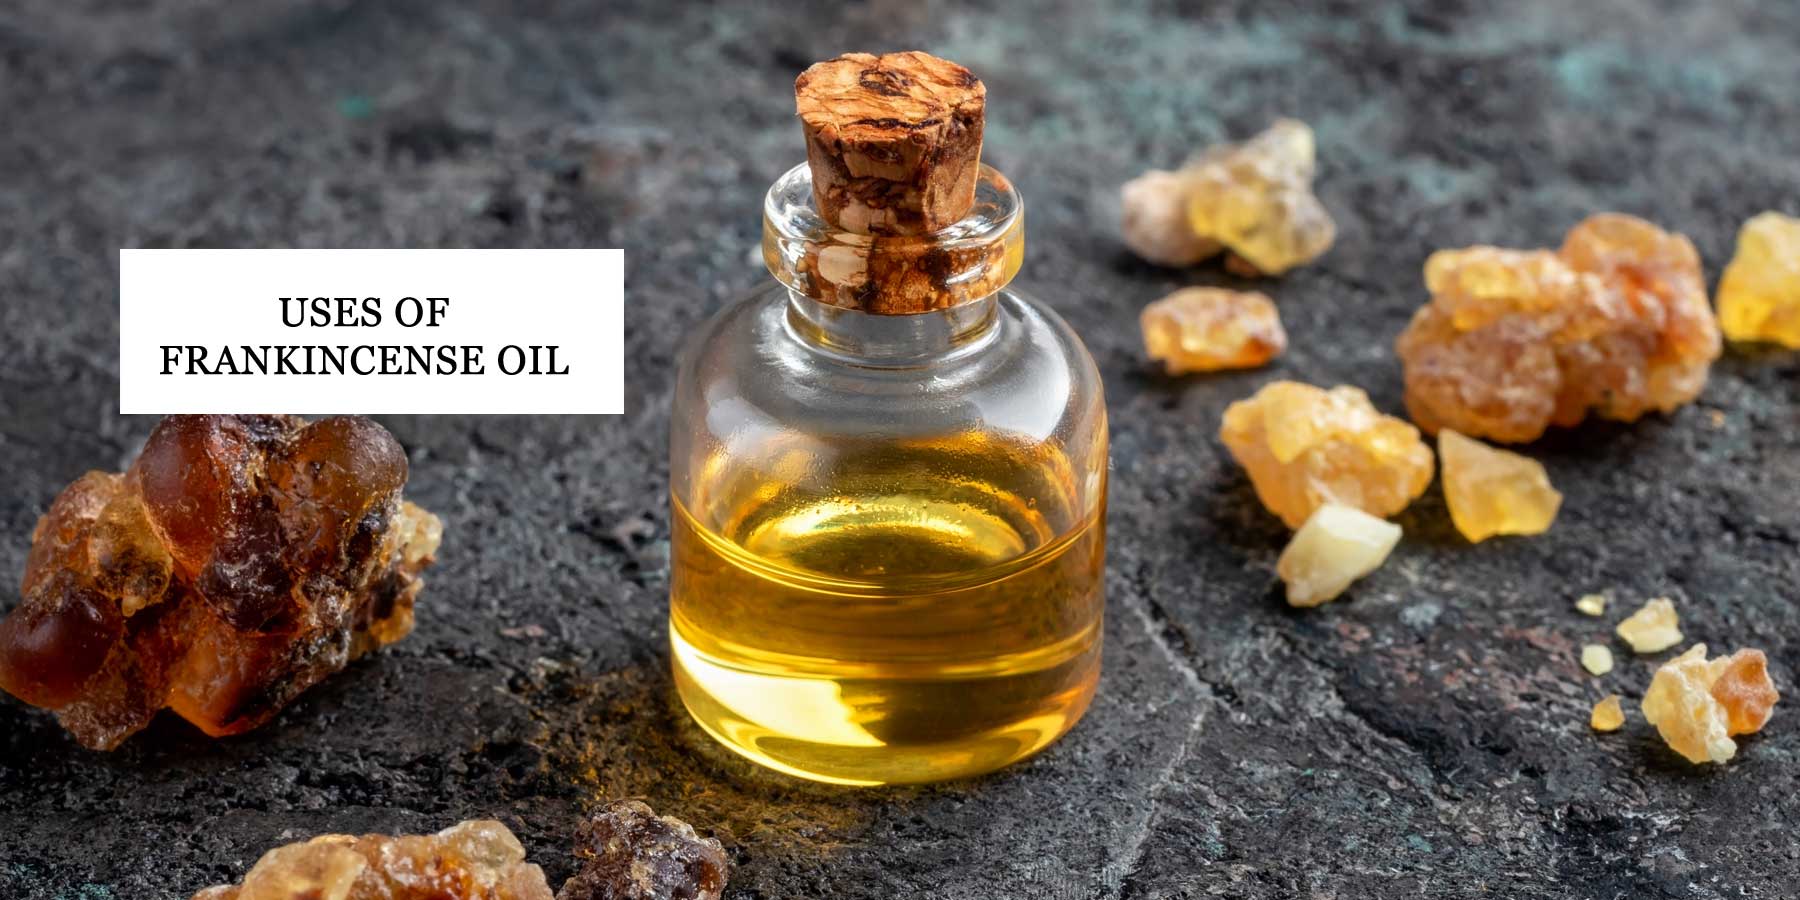 Use of frankincense oil